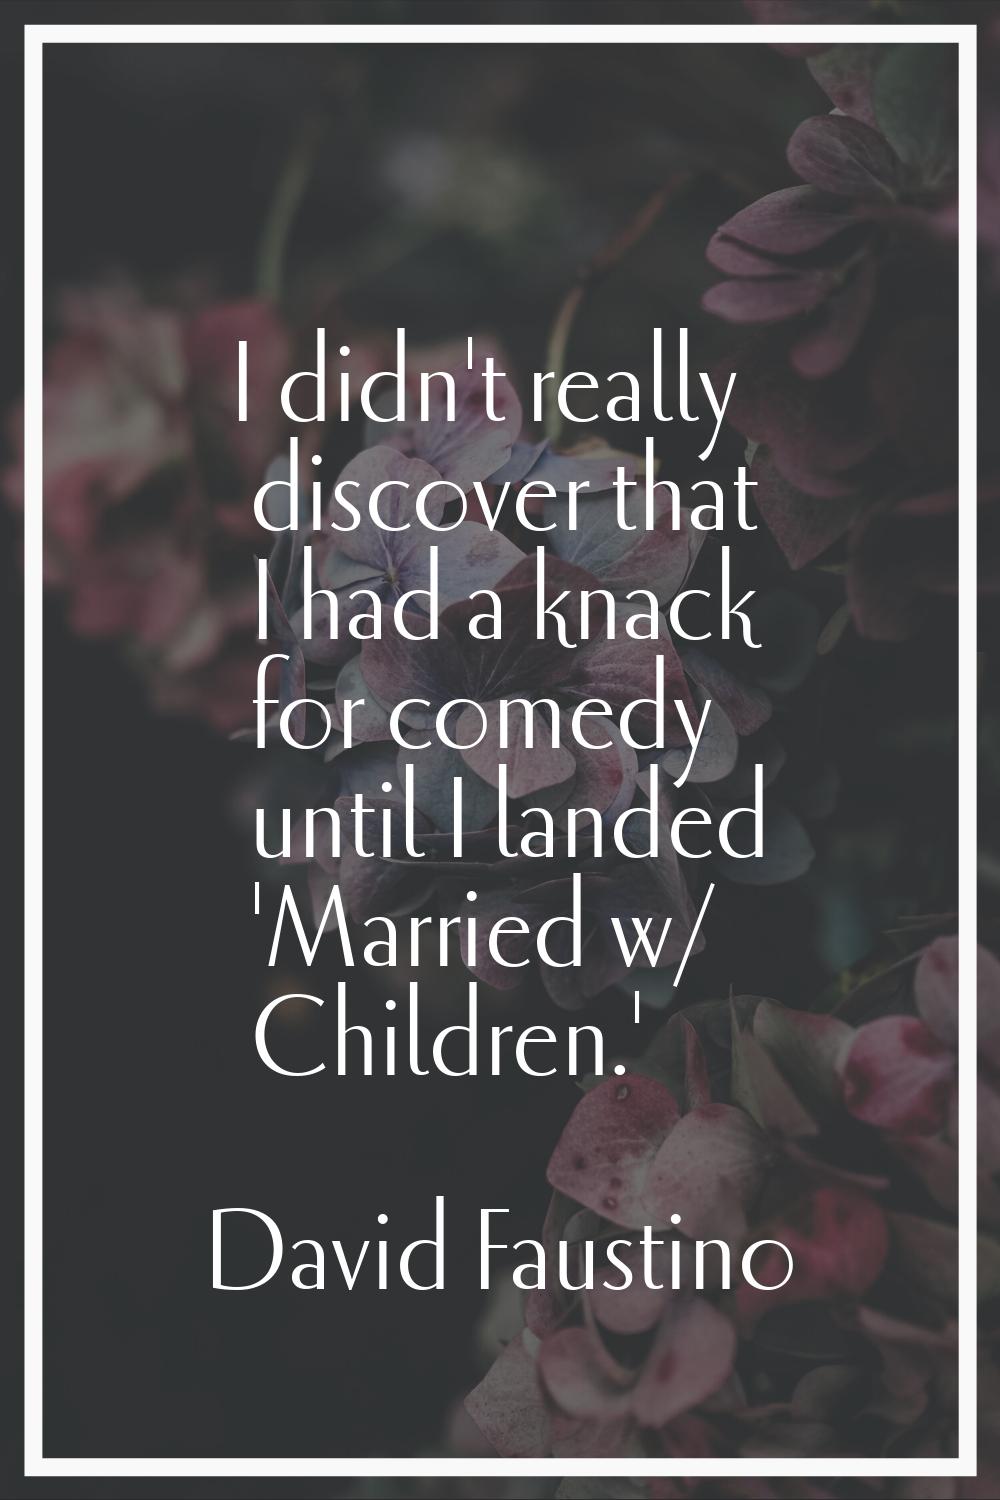 I didn't really discover that I had a knack for comedy until I landed 'Married w/ Children.'